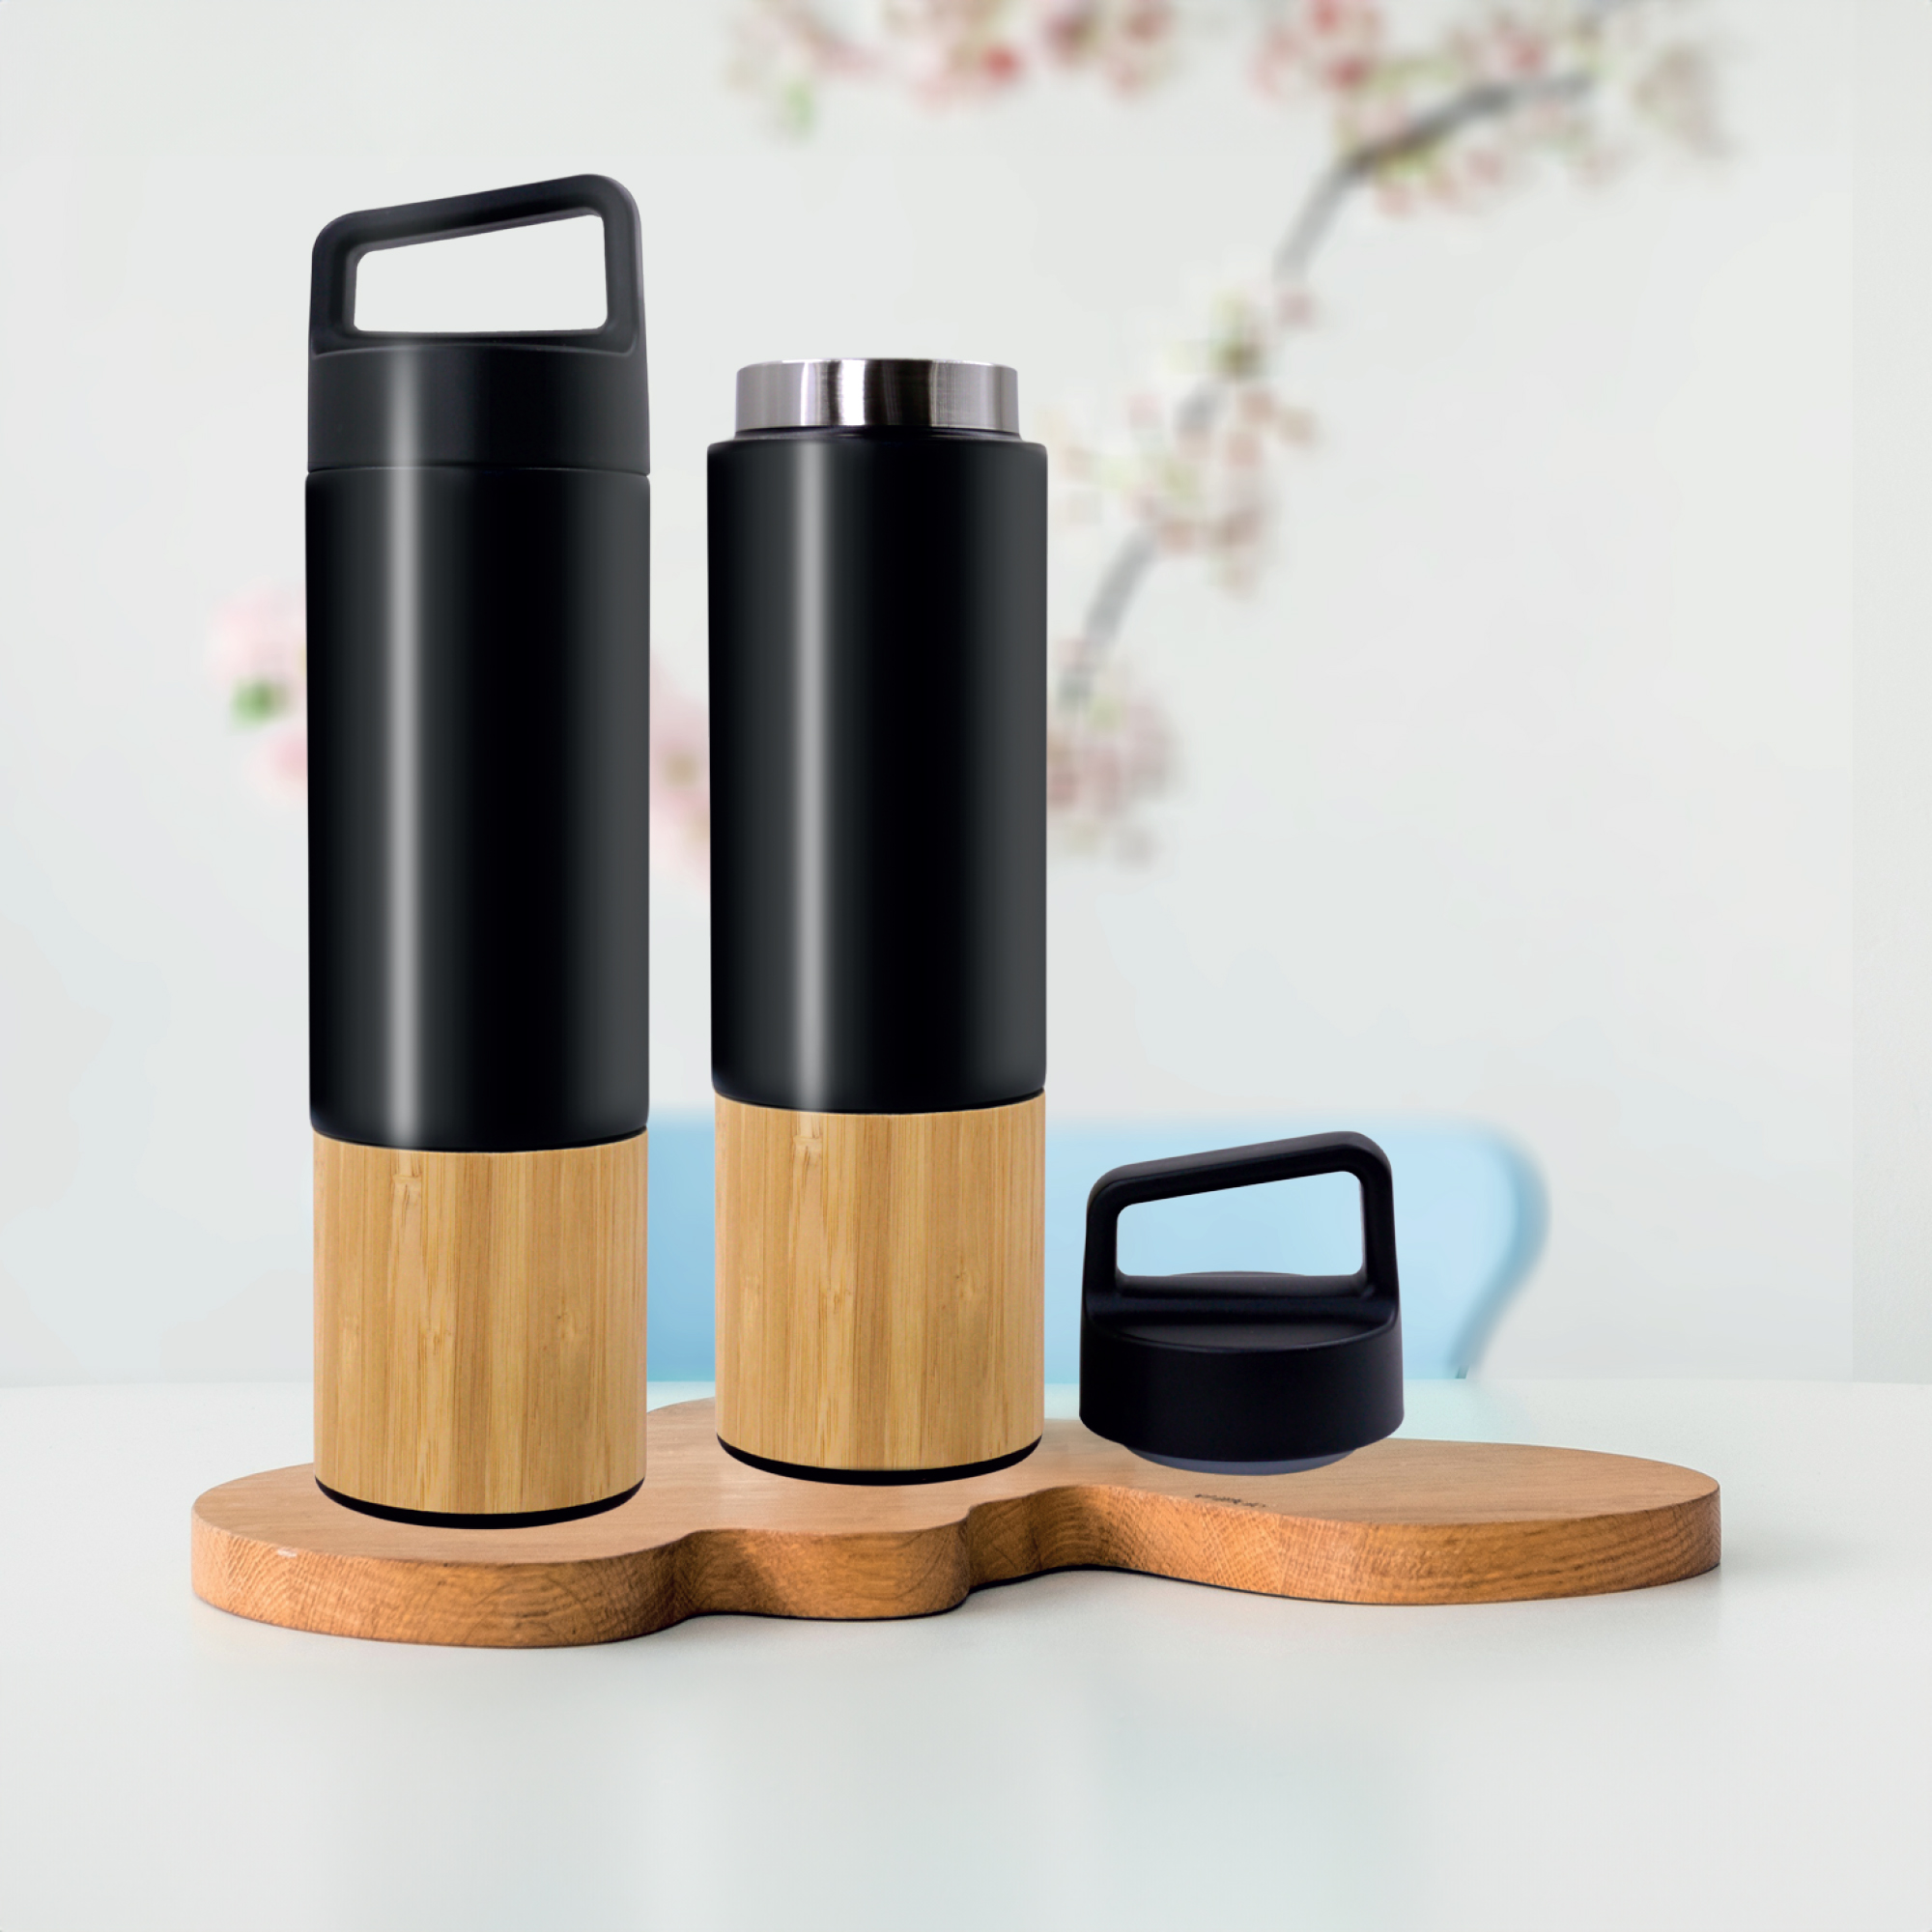 Metal/Bamboo Flask: A stylish and eco-friendly beverage container.